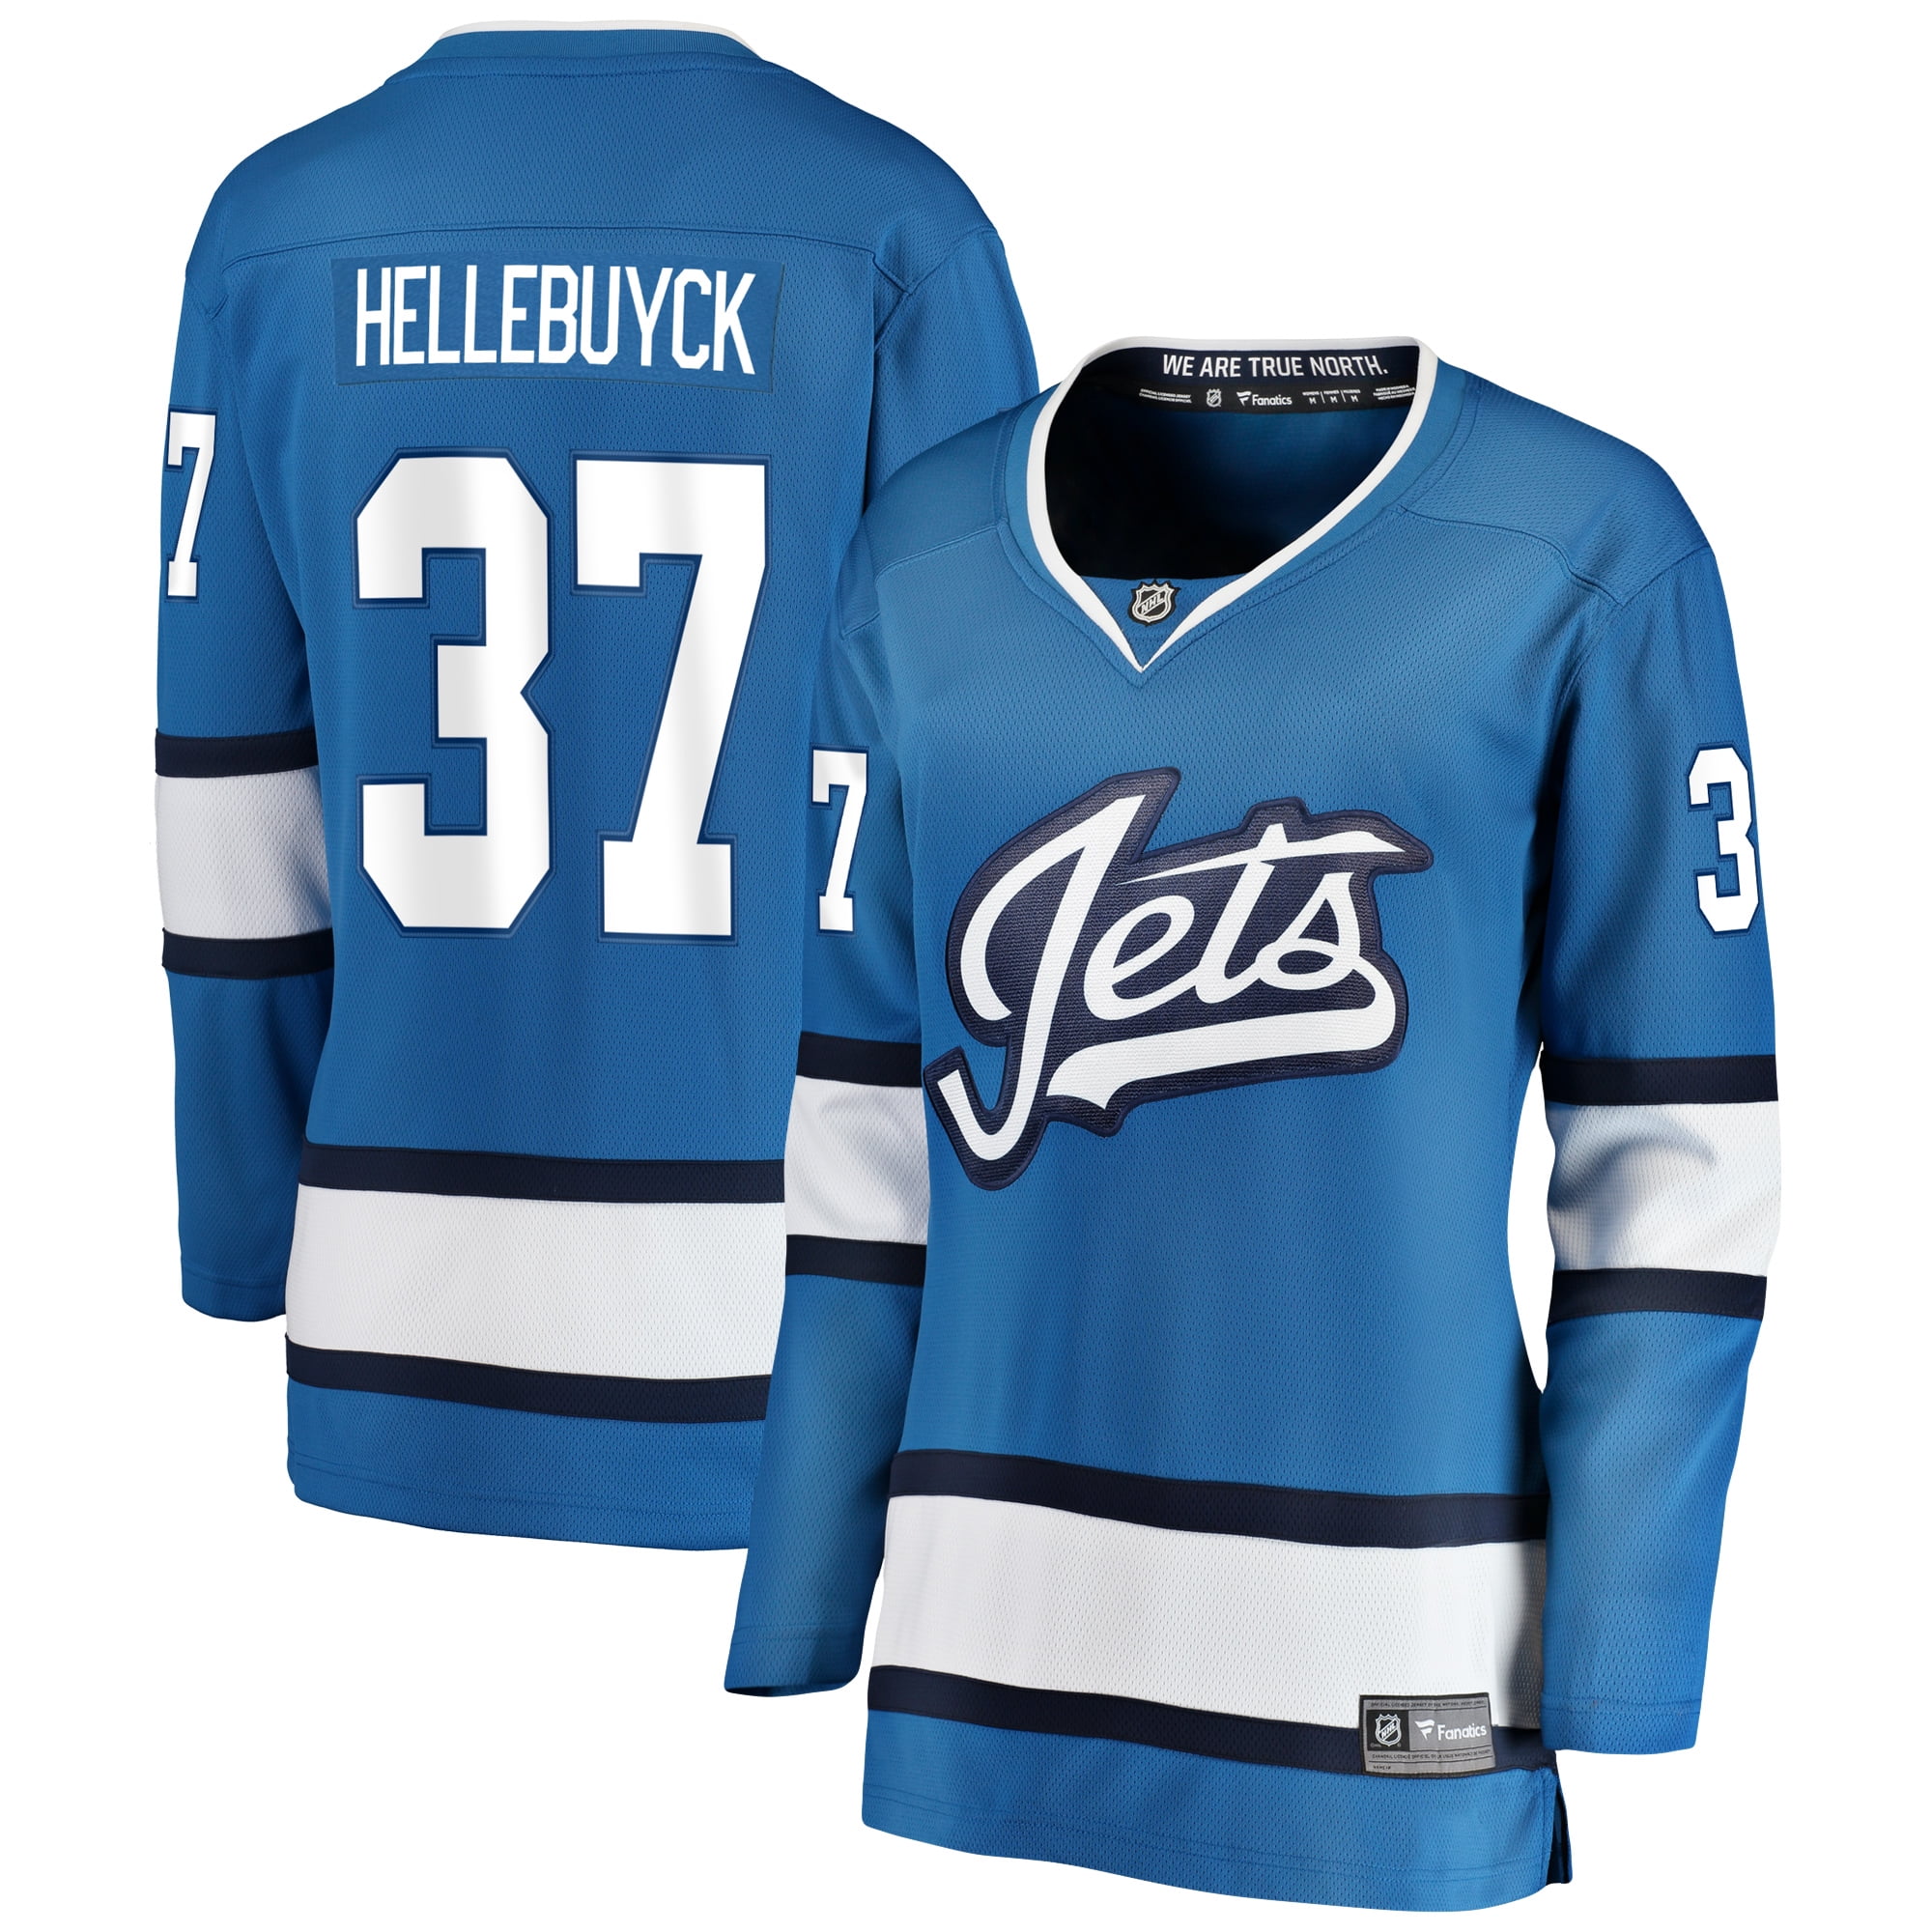 connor hellebuyck jersey number